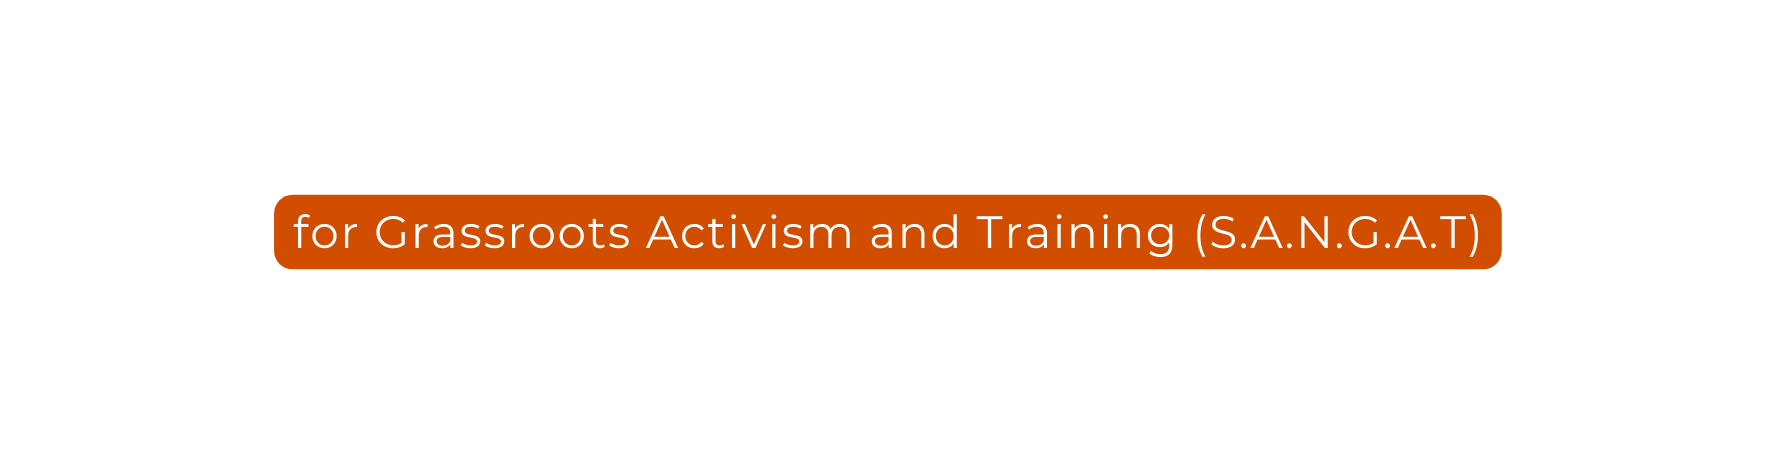 for Grassroots Activism and Training S A N G A T